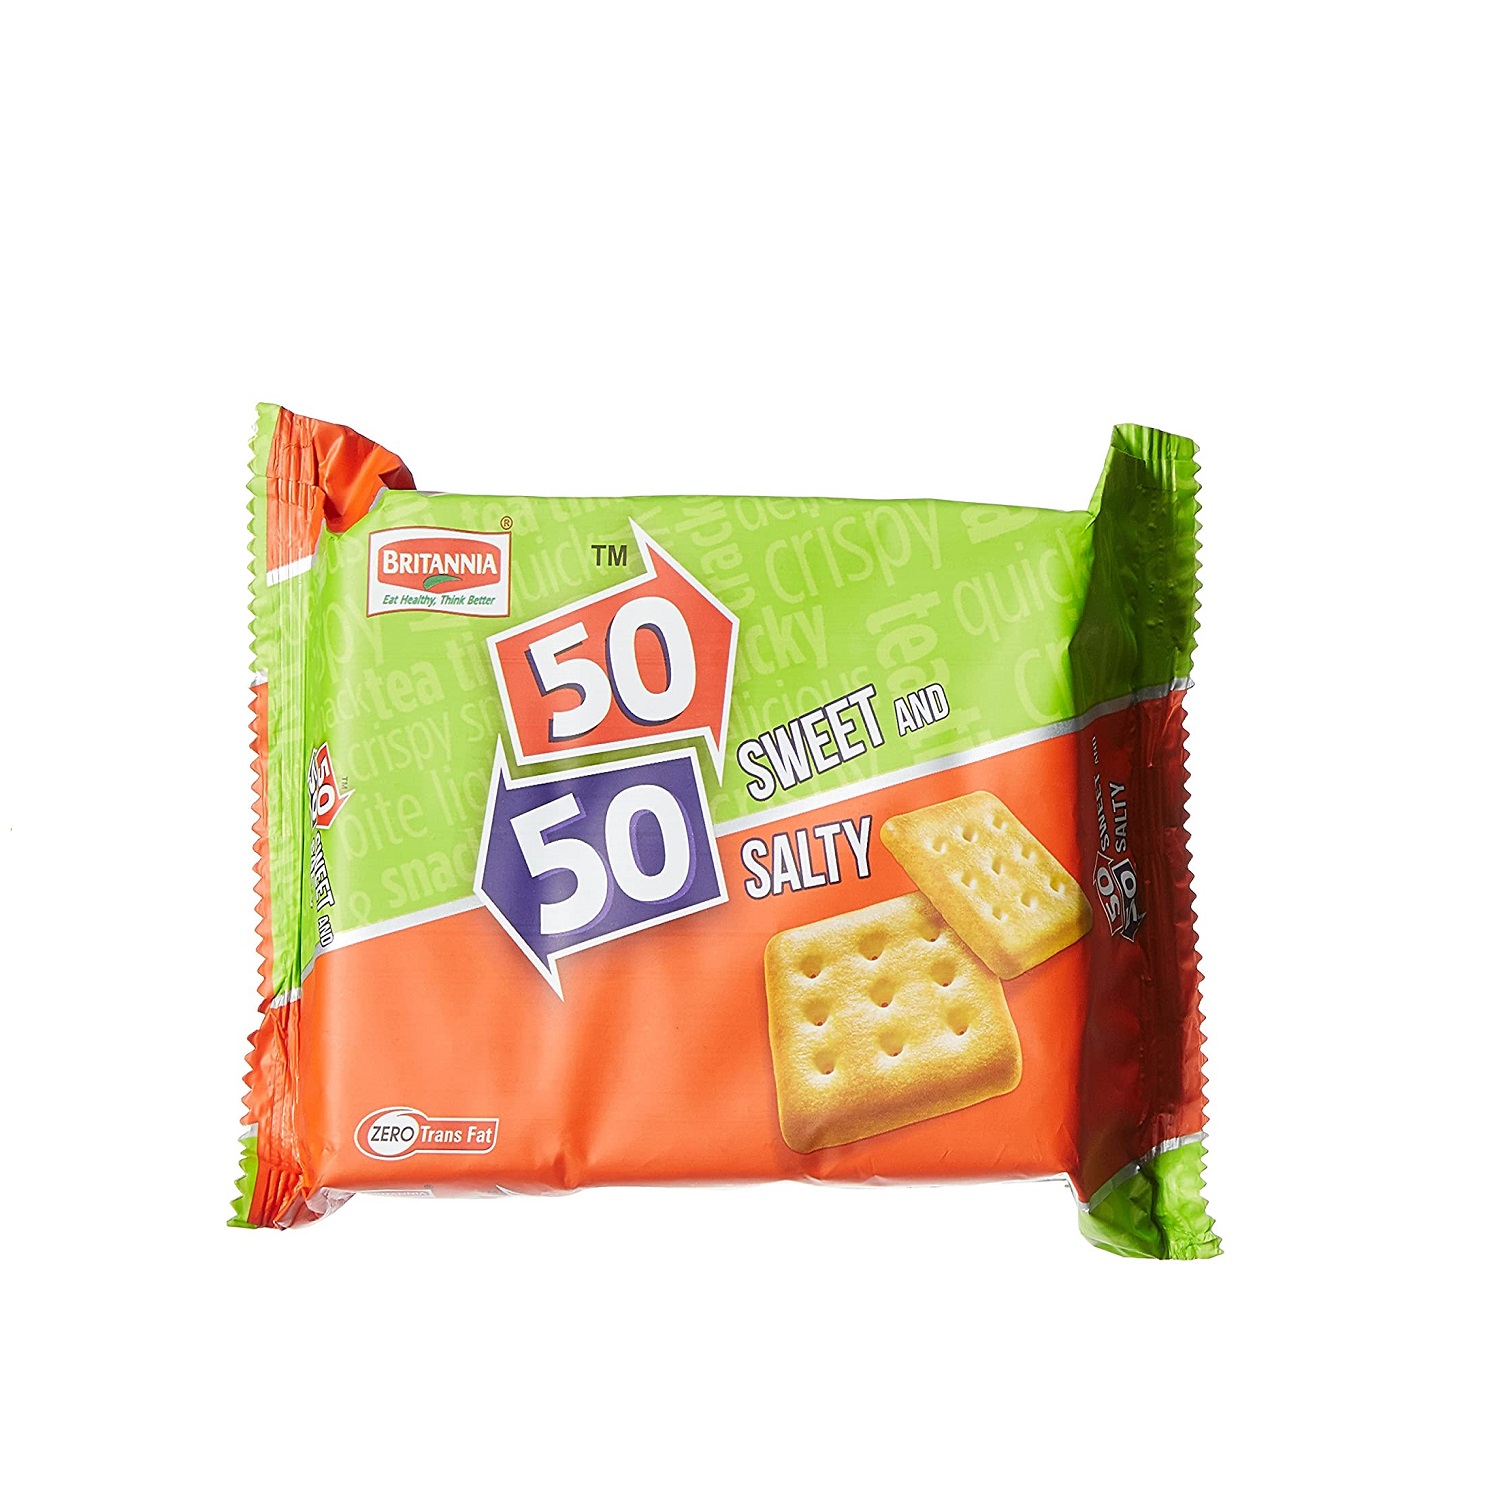 Britannia 50-50 Biscuits - 200g Pouch : Amazon.in: Grocery & Gourmet Foods